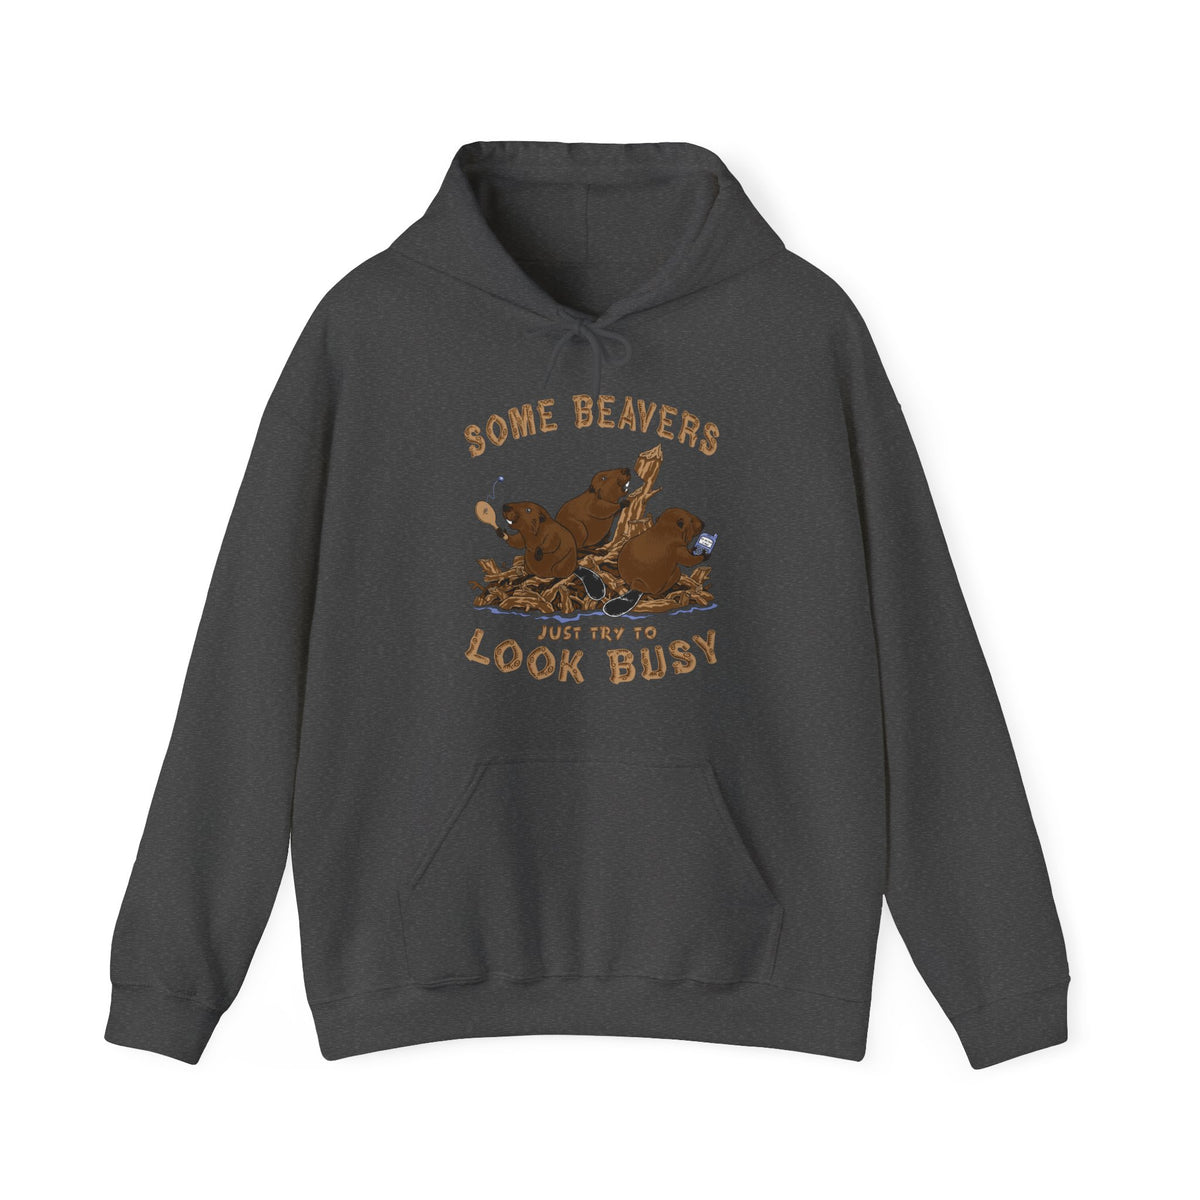 Some Beavers Just Try To Look Busy - Hoodie